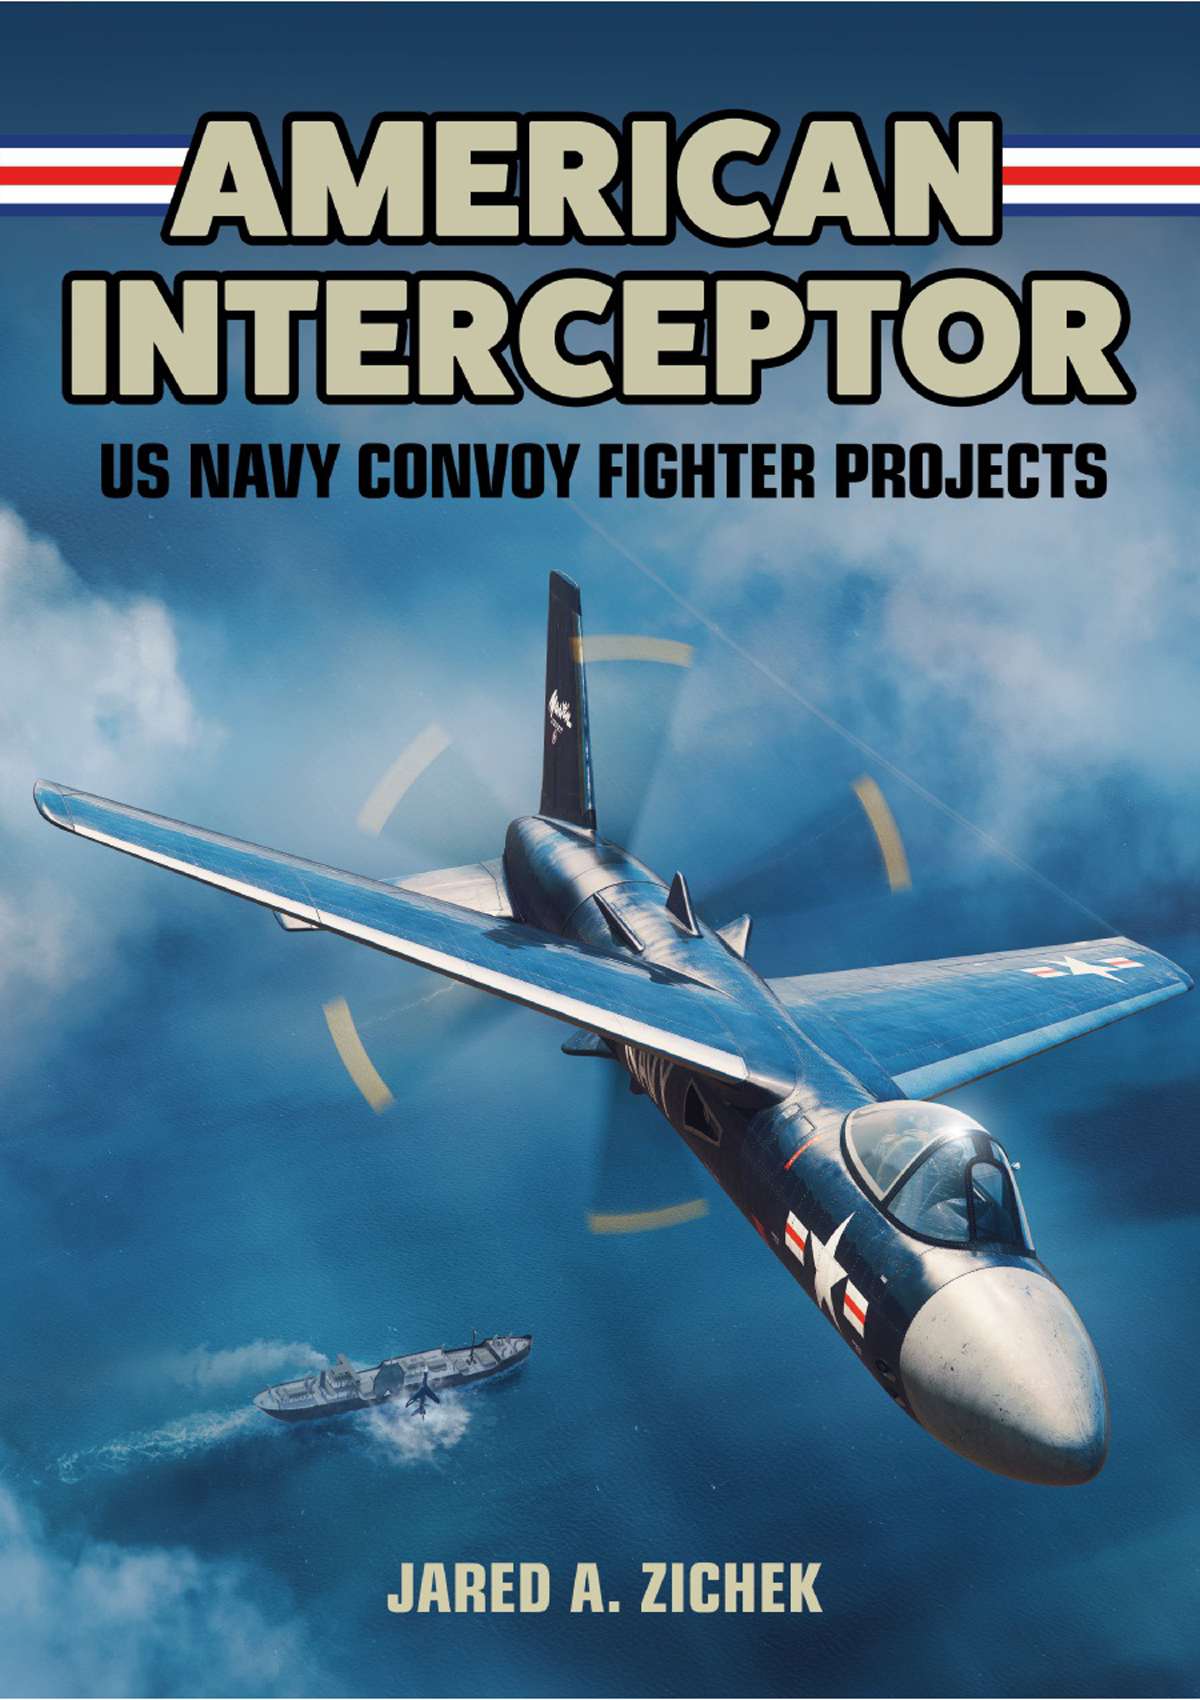 American Interceptor: US Navy Convoy Fighter Projects